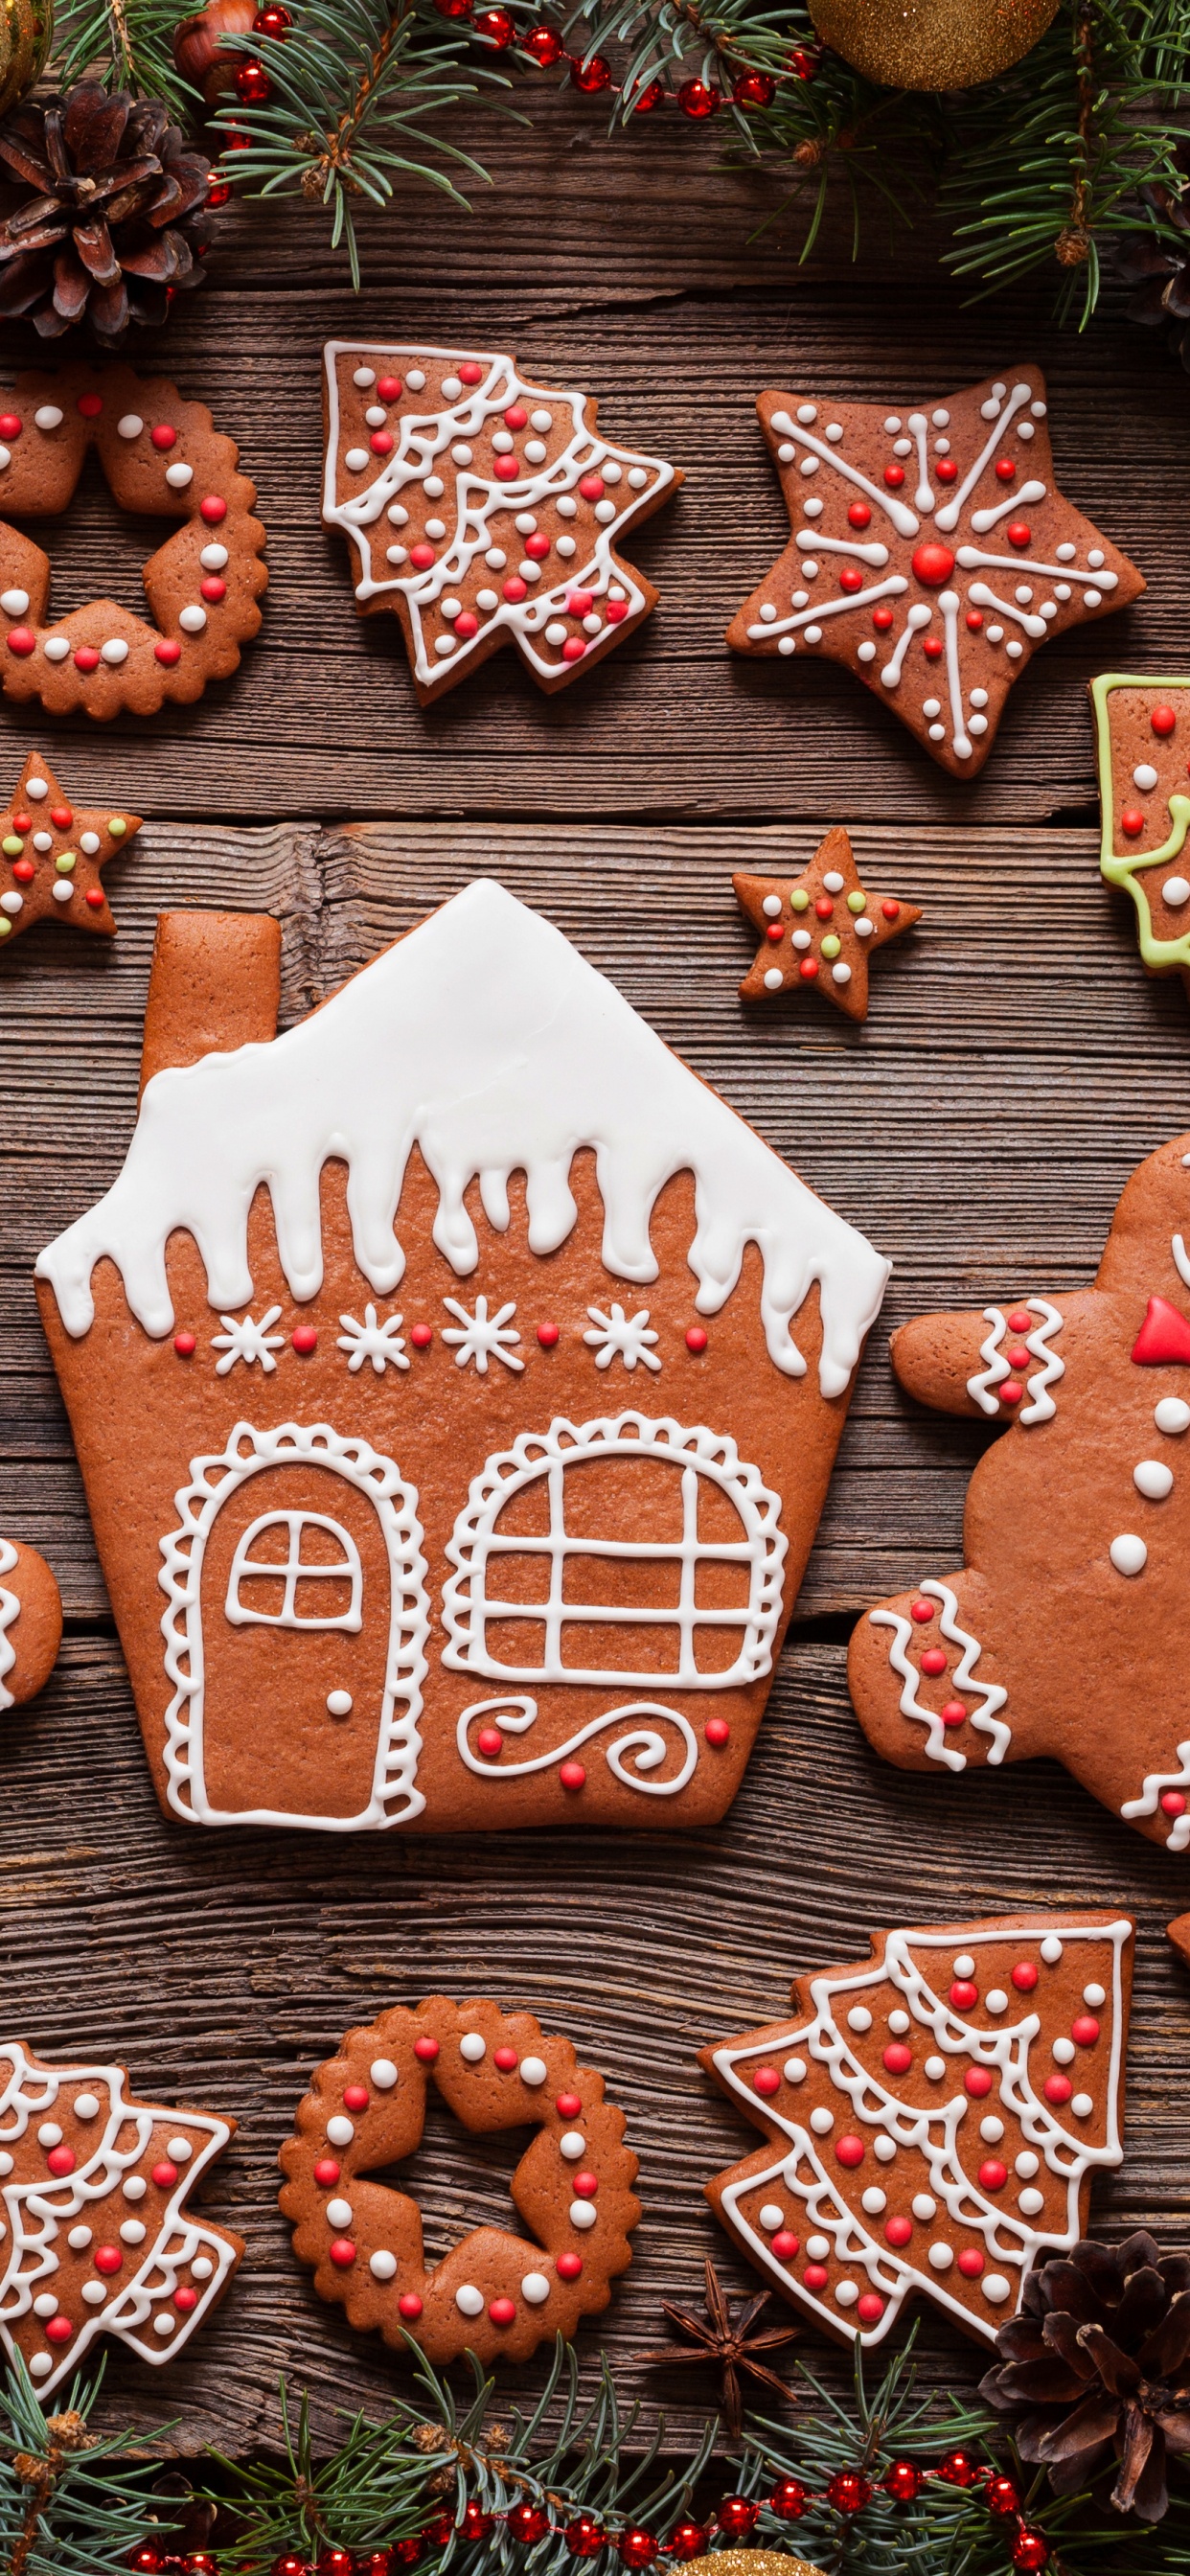 Gingerbread House, Christmas Day, Gingerbread Man, New Year, Christmas Tree. Wallpaper in 1242x2688 Resolution